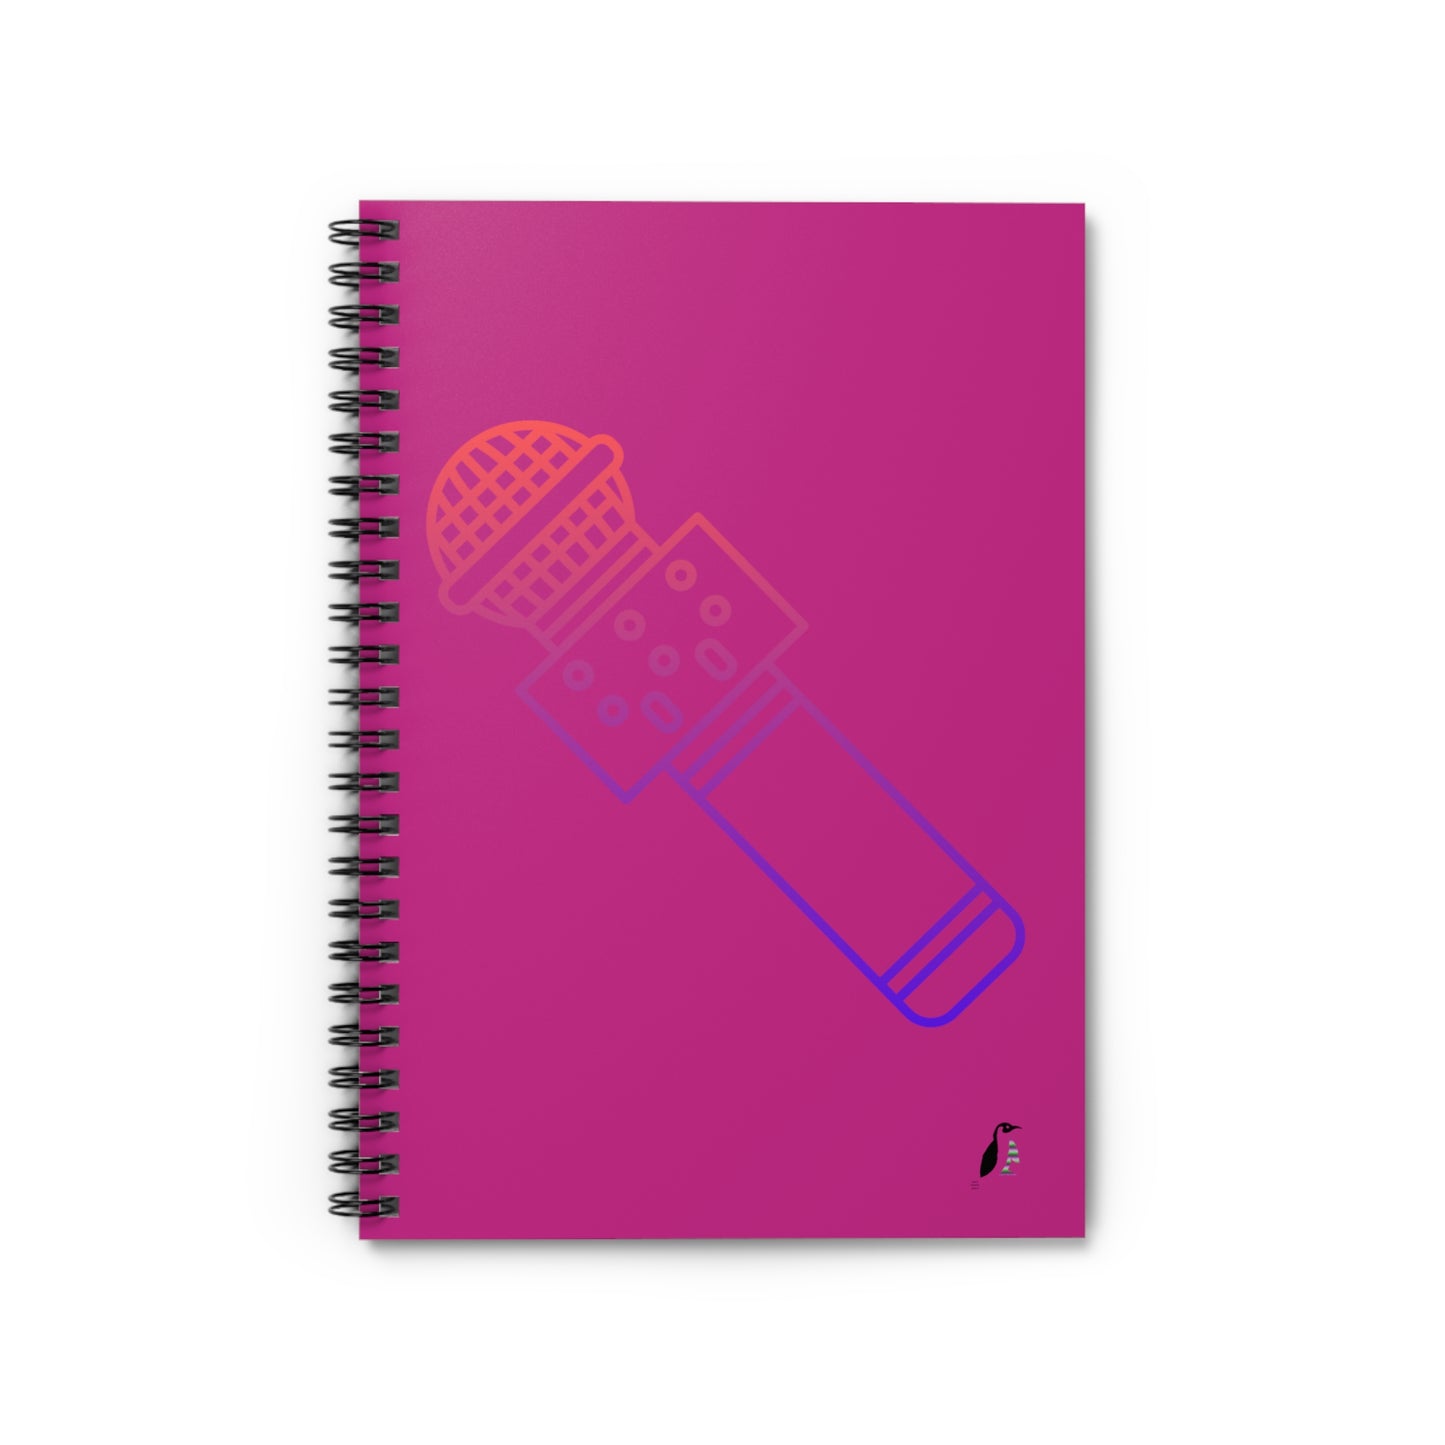 Spiral Notebook - Ruled Line: Music Pink